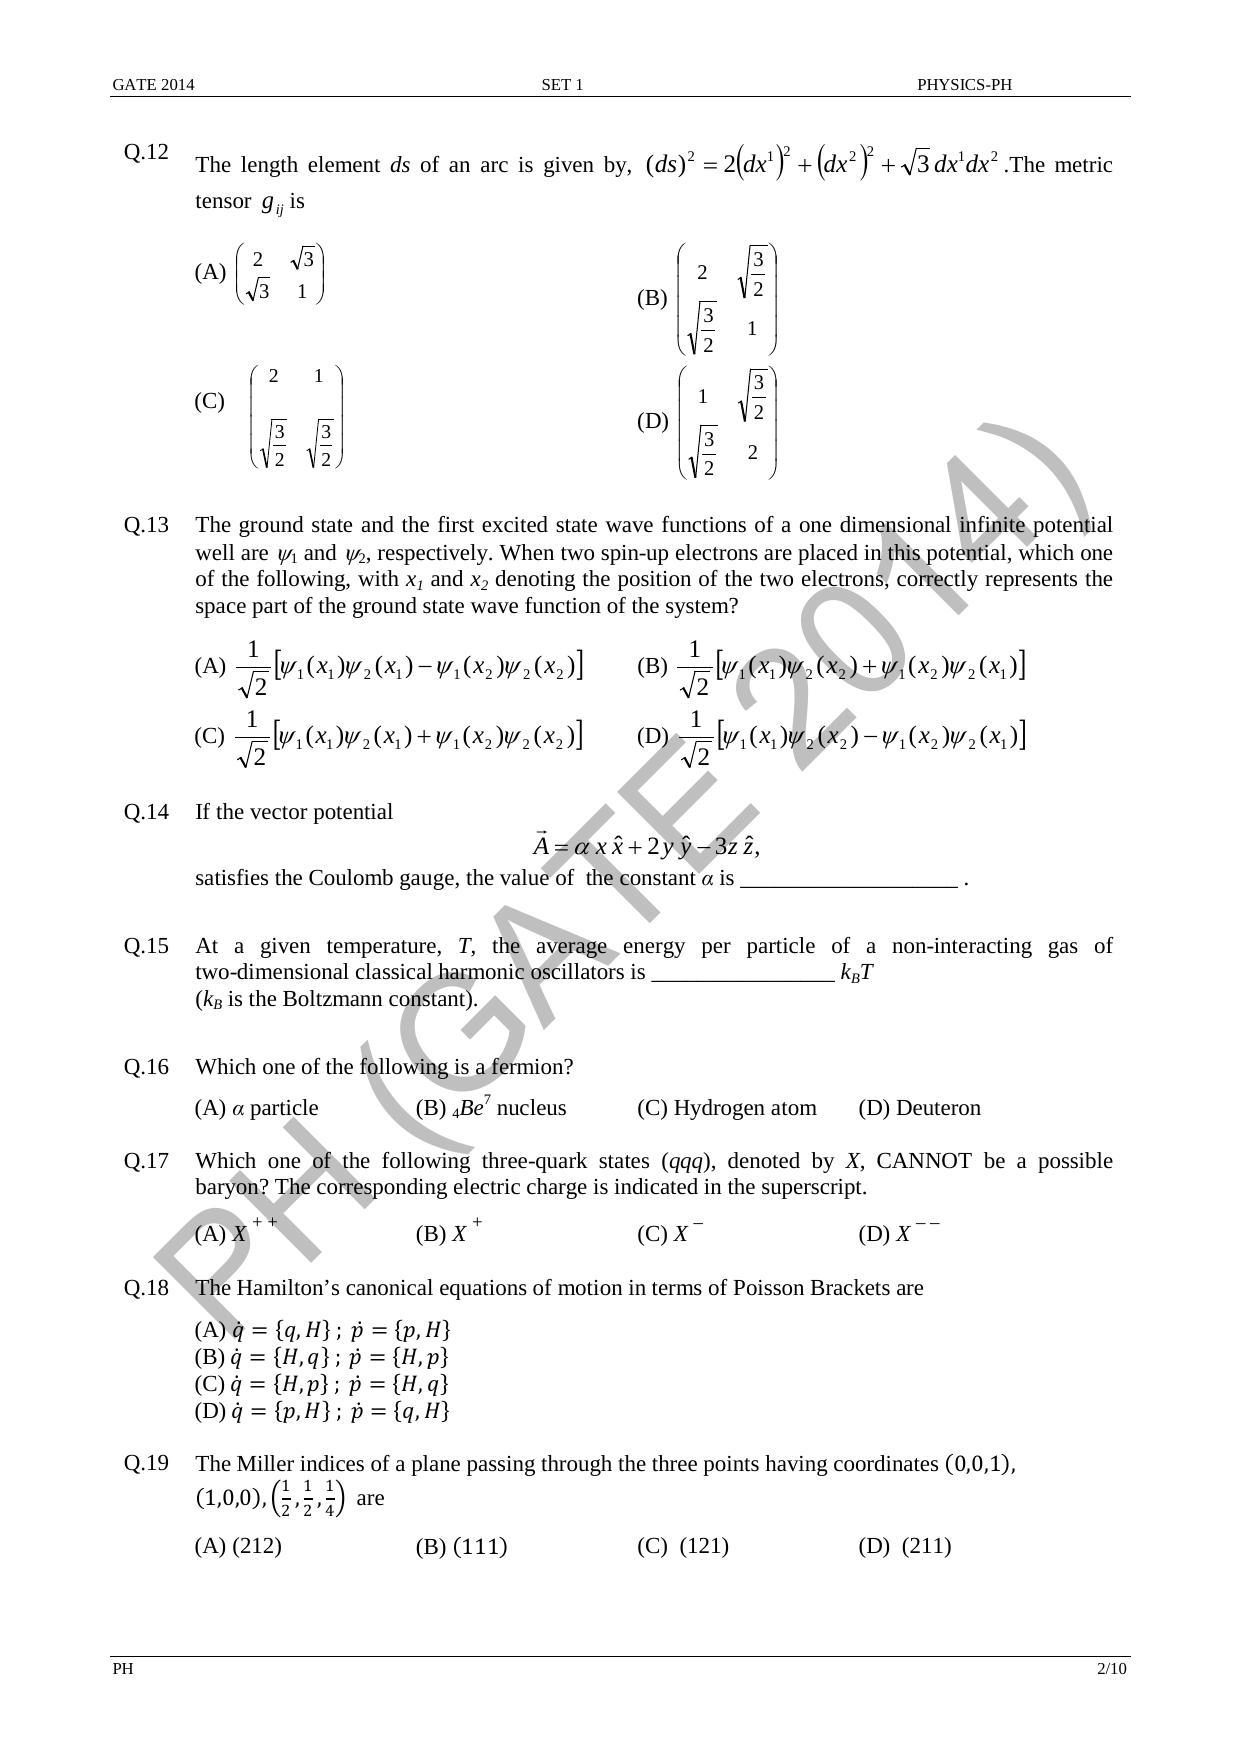 GATE 2014 Physics (PH) Question Paper with Answer Key - Page 9